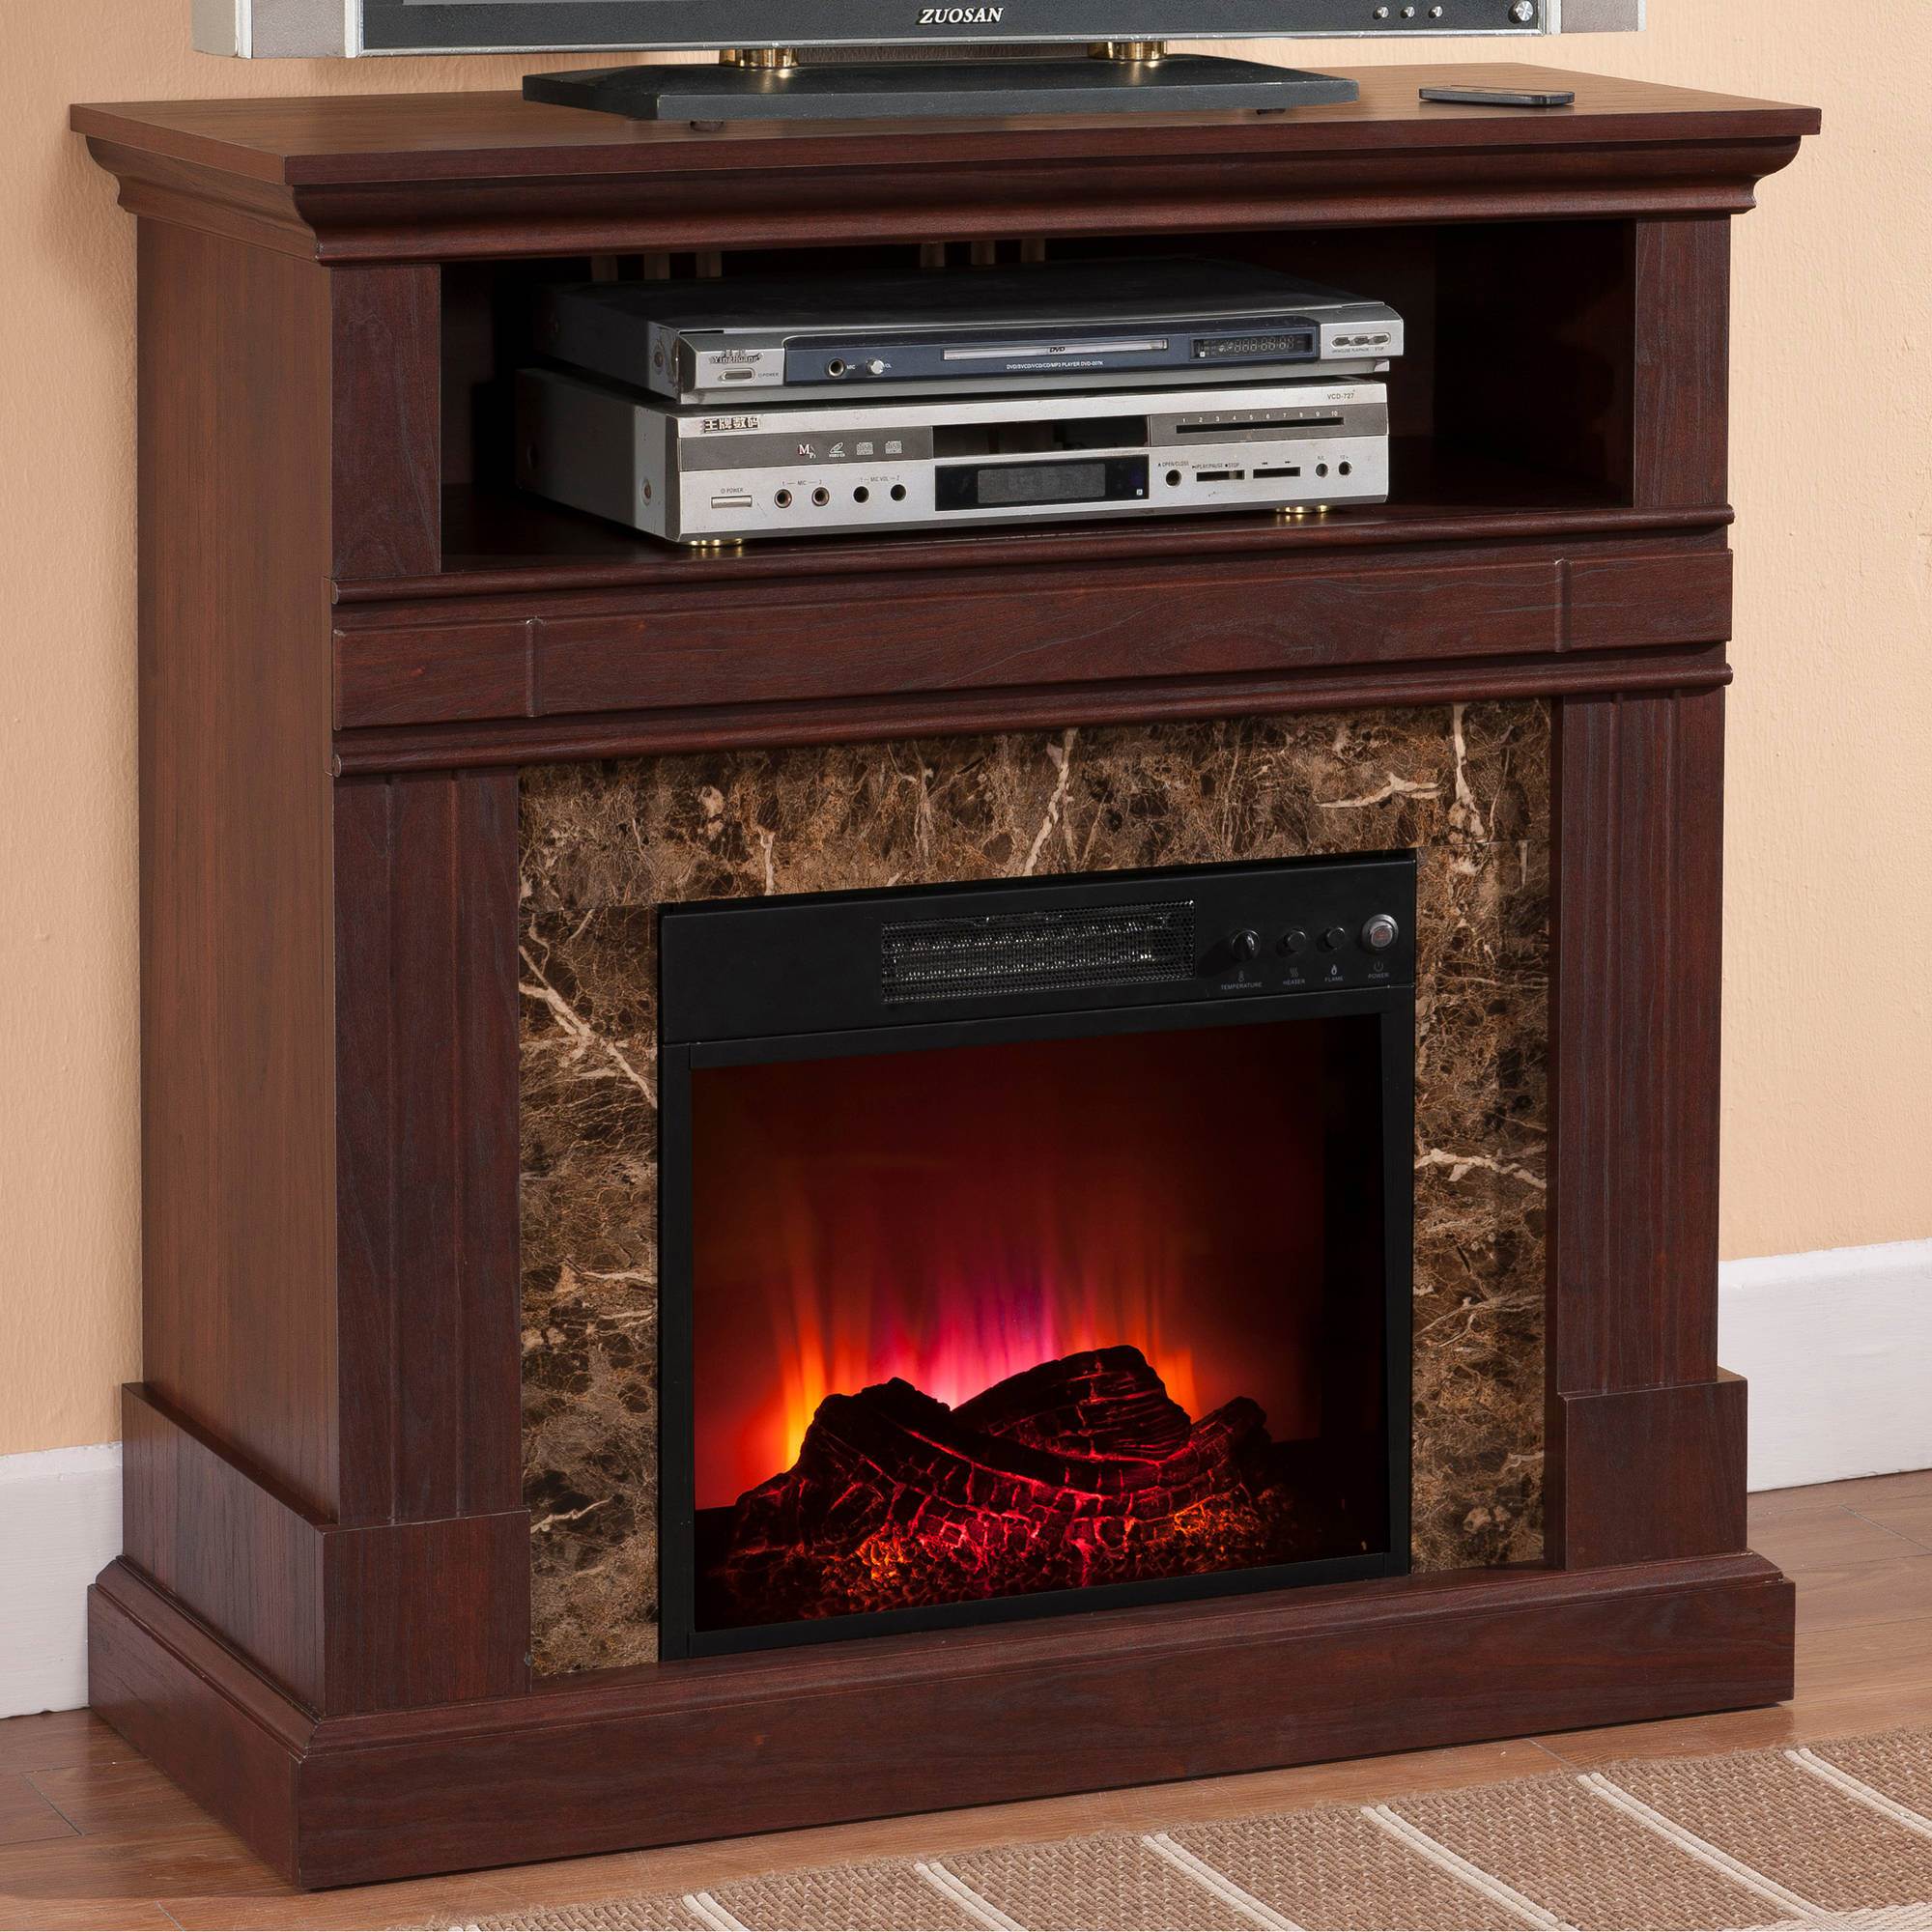 Portable Fireplace Tv Stand Luxury White Electric Fireplace Tv Stand